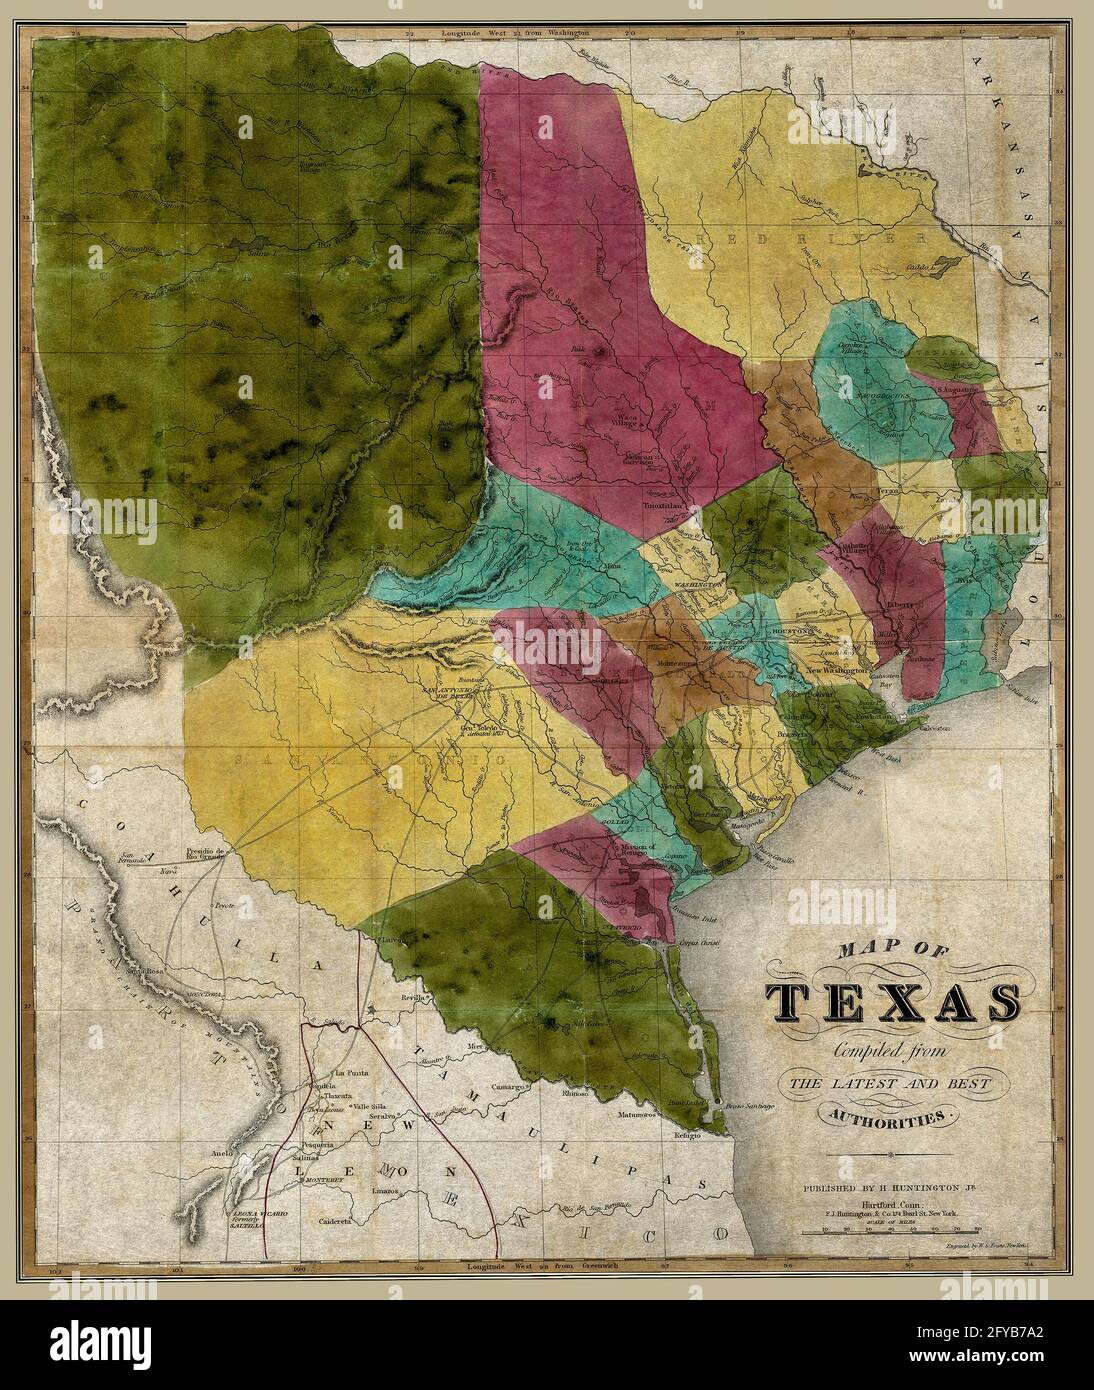 Original title: 'Map [of the republic] of Texas compiled from the latest and best authorities.' The map of the Republic of Texas is quite different from the present day boundaries of the state of Texas. Texas became independent from Mexico at about the time of the creation of this map. This is an enhanced, restored reproduction of an historic 1837 map. Stock Photo